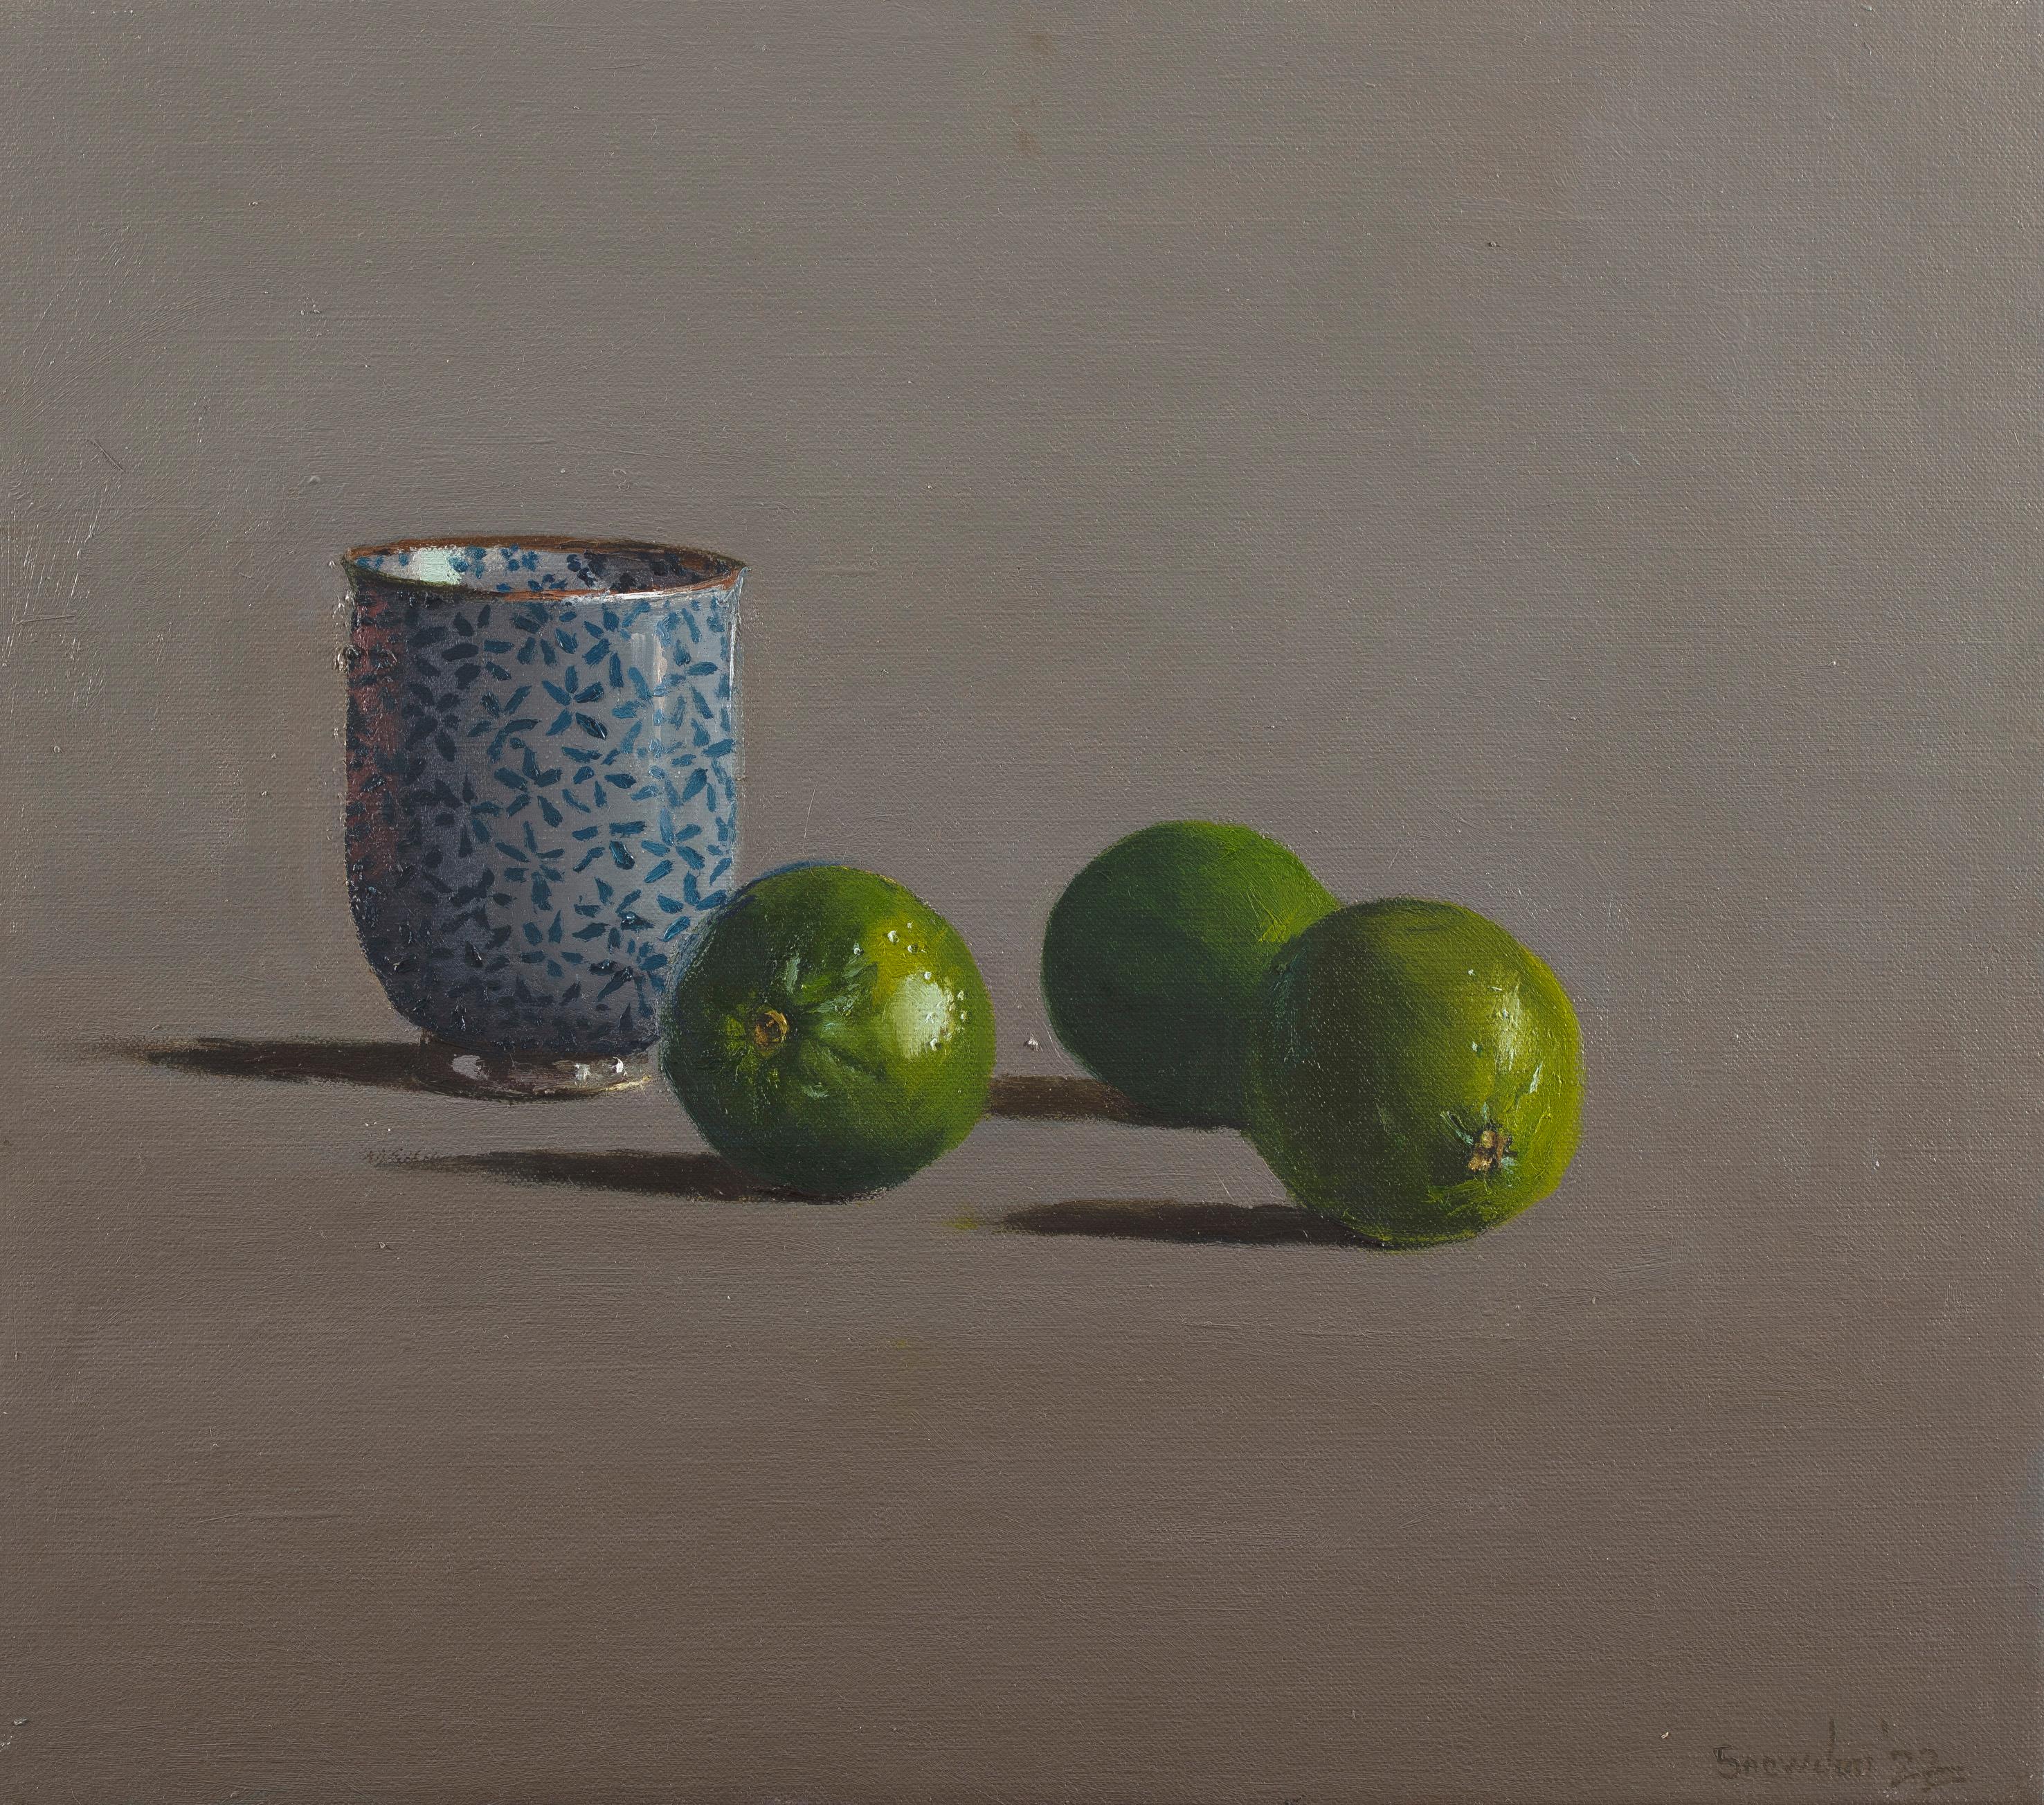 Original artwork on linen by established Australian painter Tim Snowdon. Japanese cup with limes is one of three original paintings featuring the same Japanese cup. The other paintings are Japanese cup with lemon and Japanese cup with mandarins.